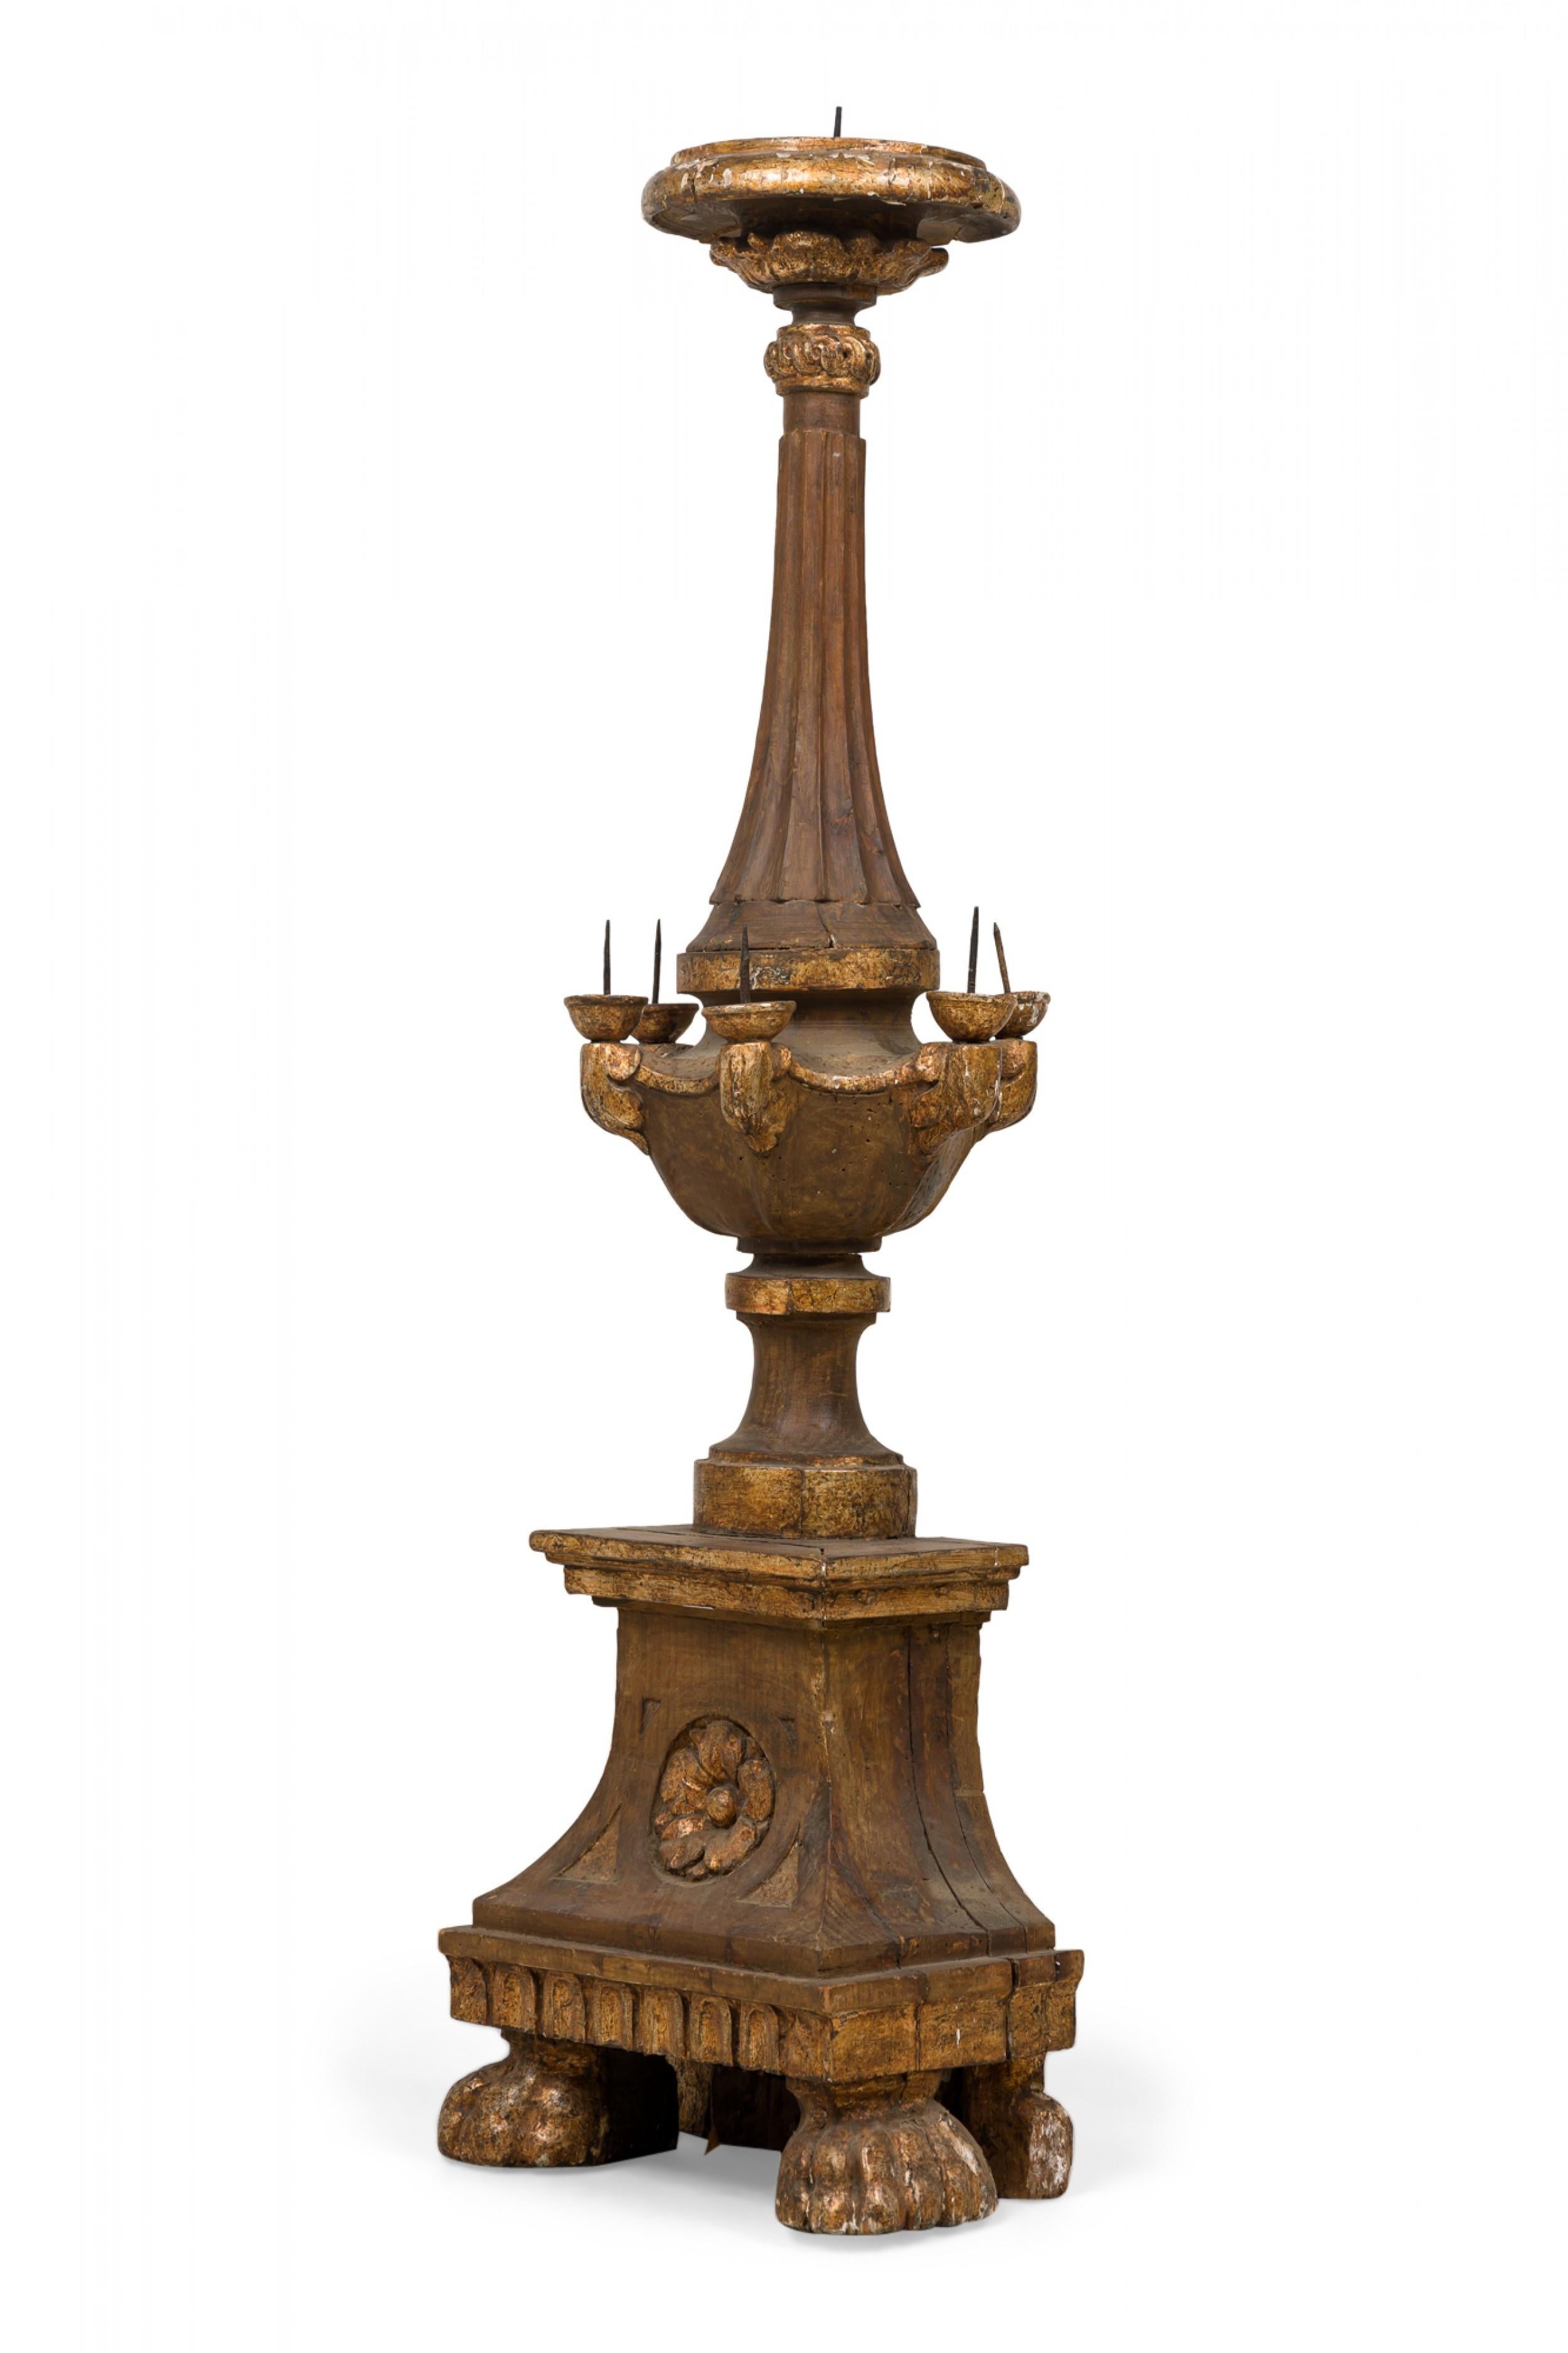 Italian Baroque (18th Century) monumental altar candlestick in a columnar form with carved detail and a gilt finish and having 5 lower candle holders (flat on back).